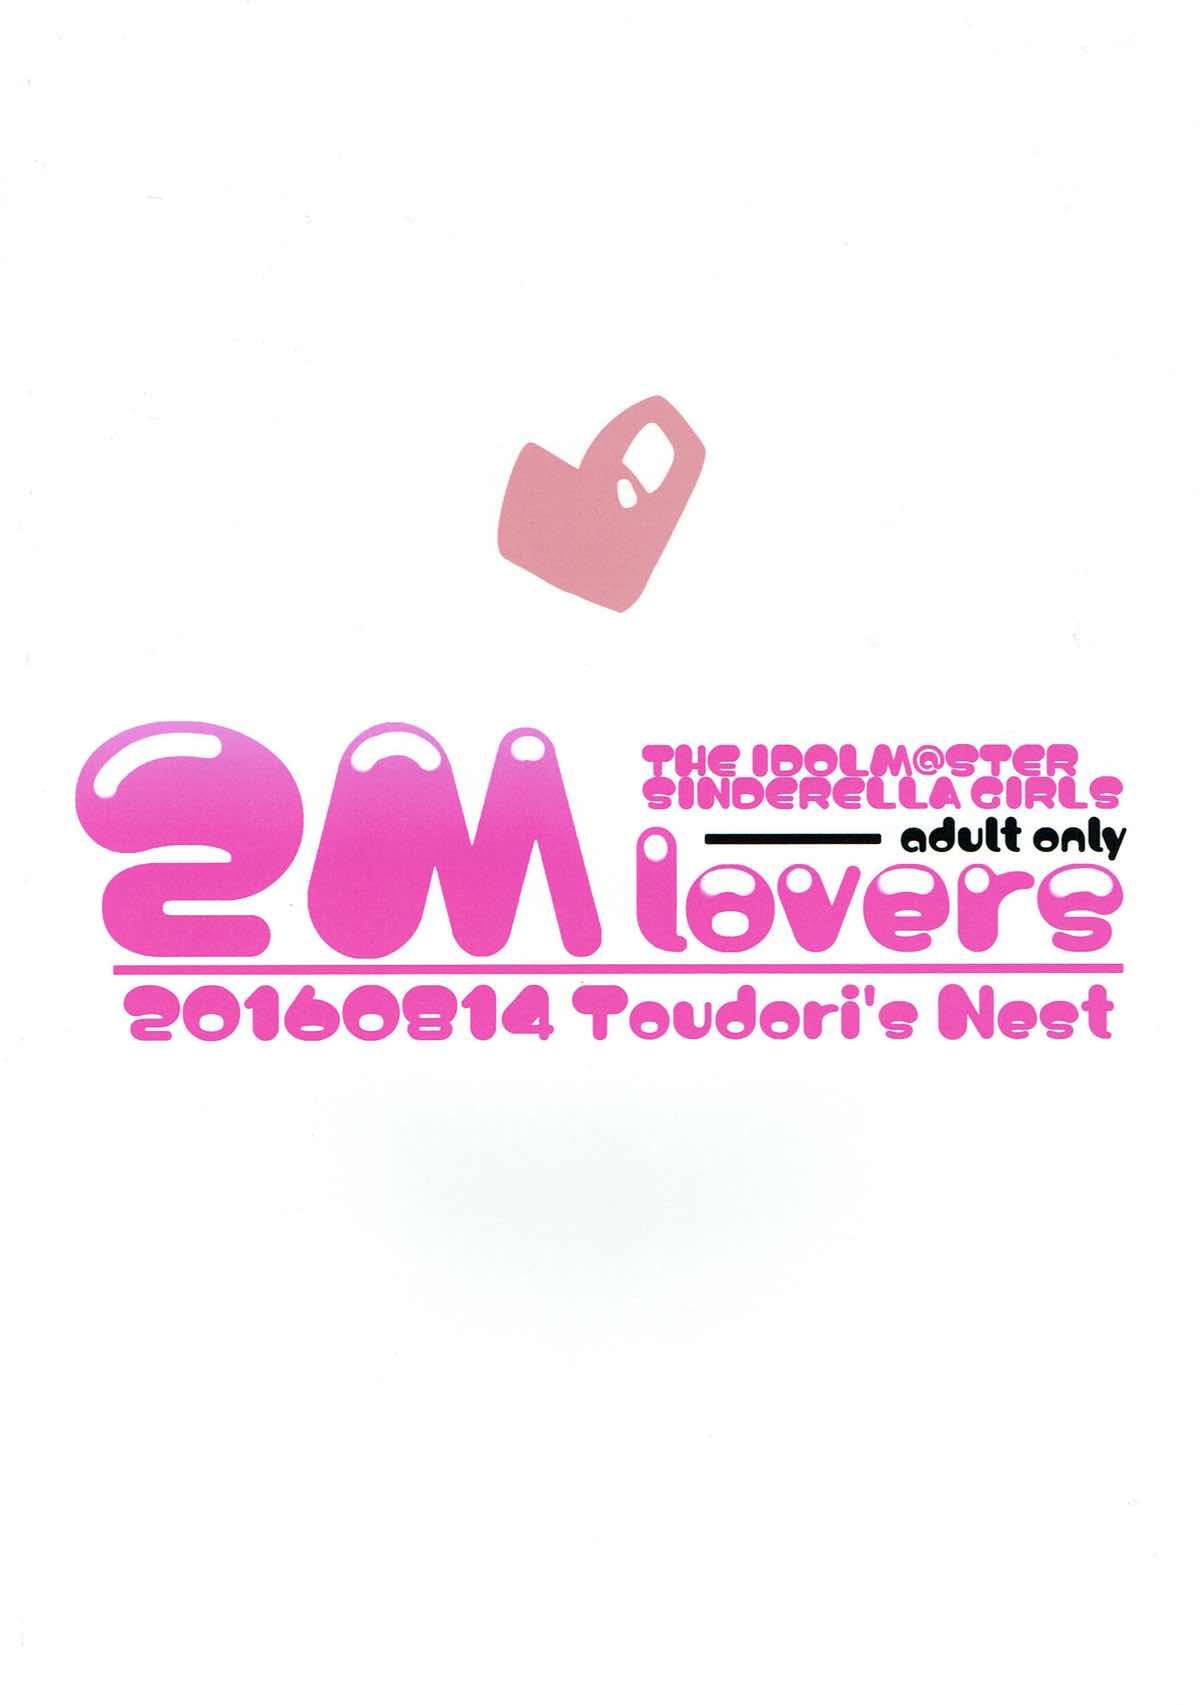 2M lovers 21